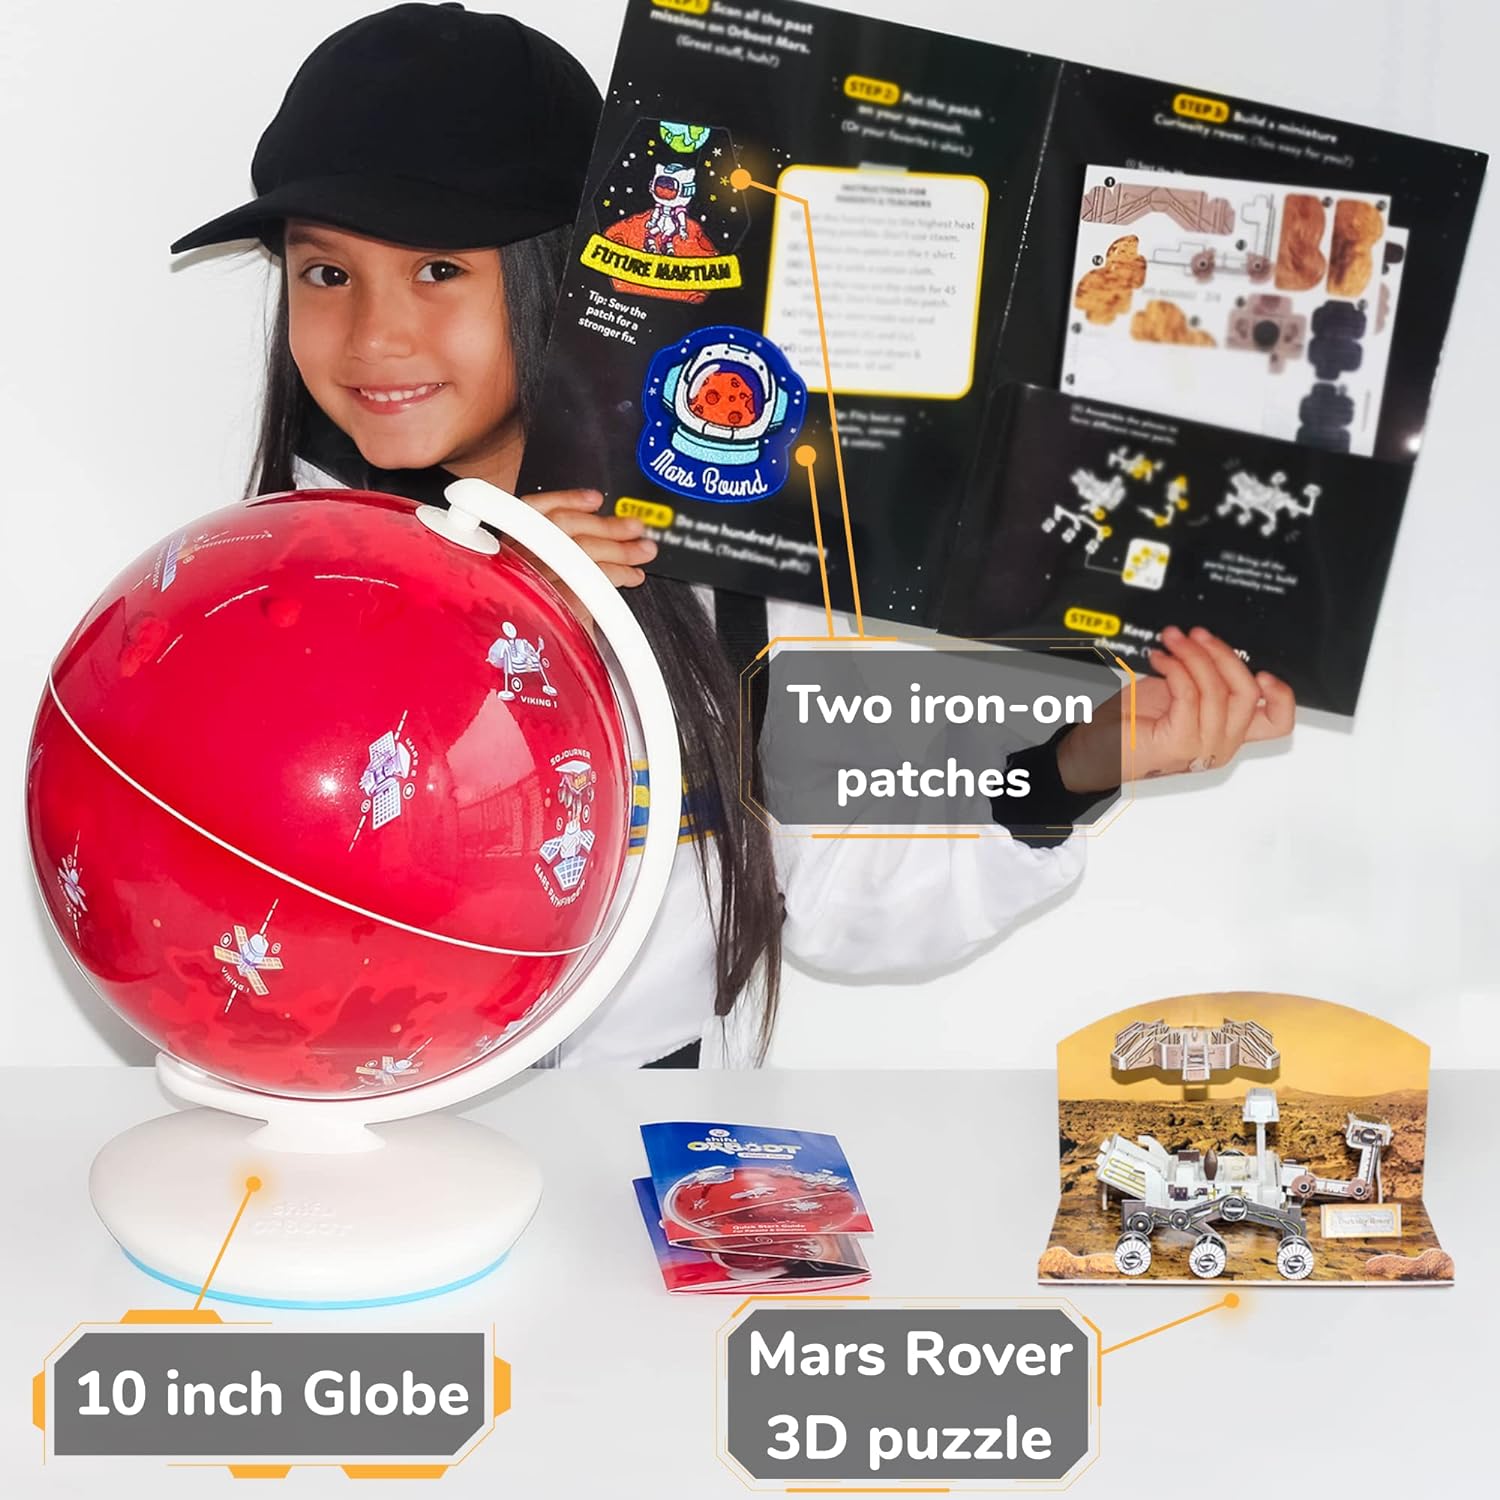 Shifu Interactive Science Kit - Orboot Mars (Globe + App) Explore Planet Mars|Educational Toys|Solar System Space Toys, STEM Toy & Gift for Kids Ages 6-12 Years (works with mobiles/tabs) Multicolor